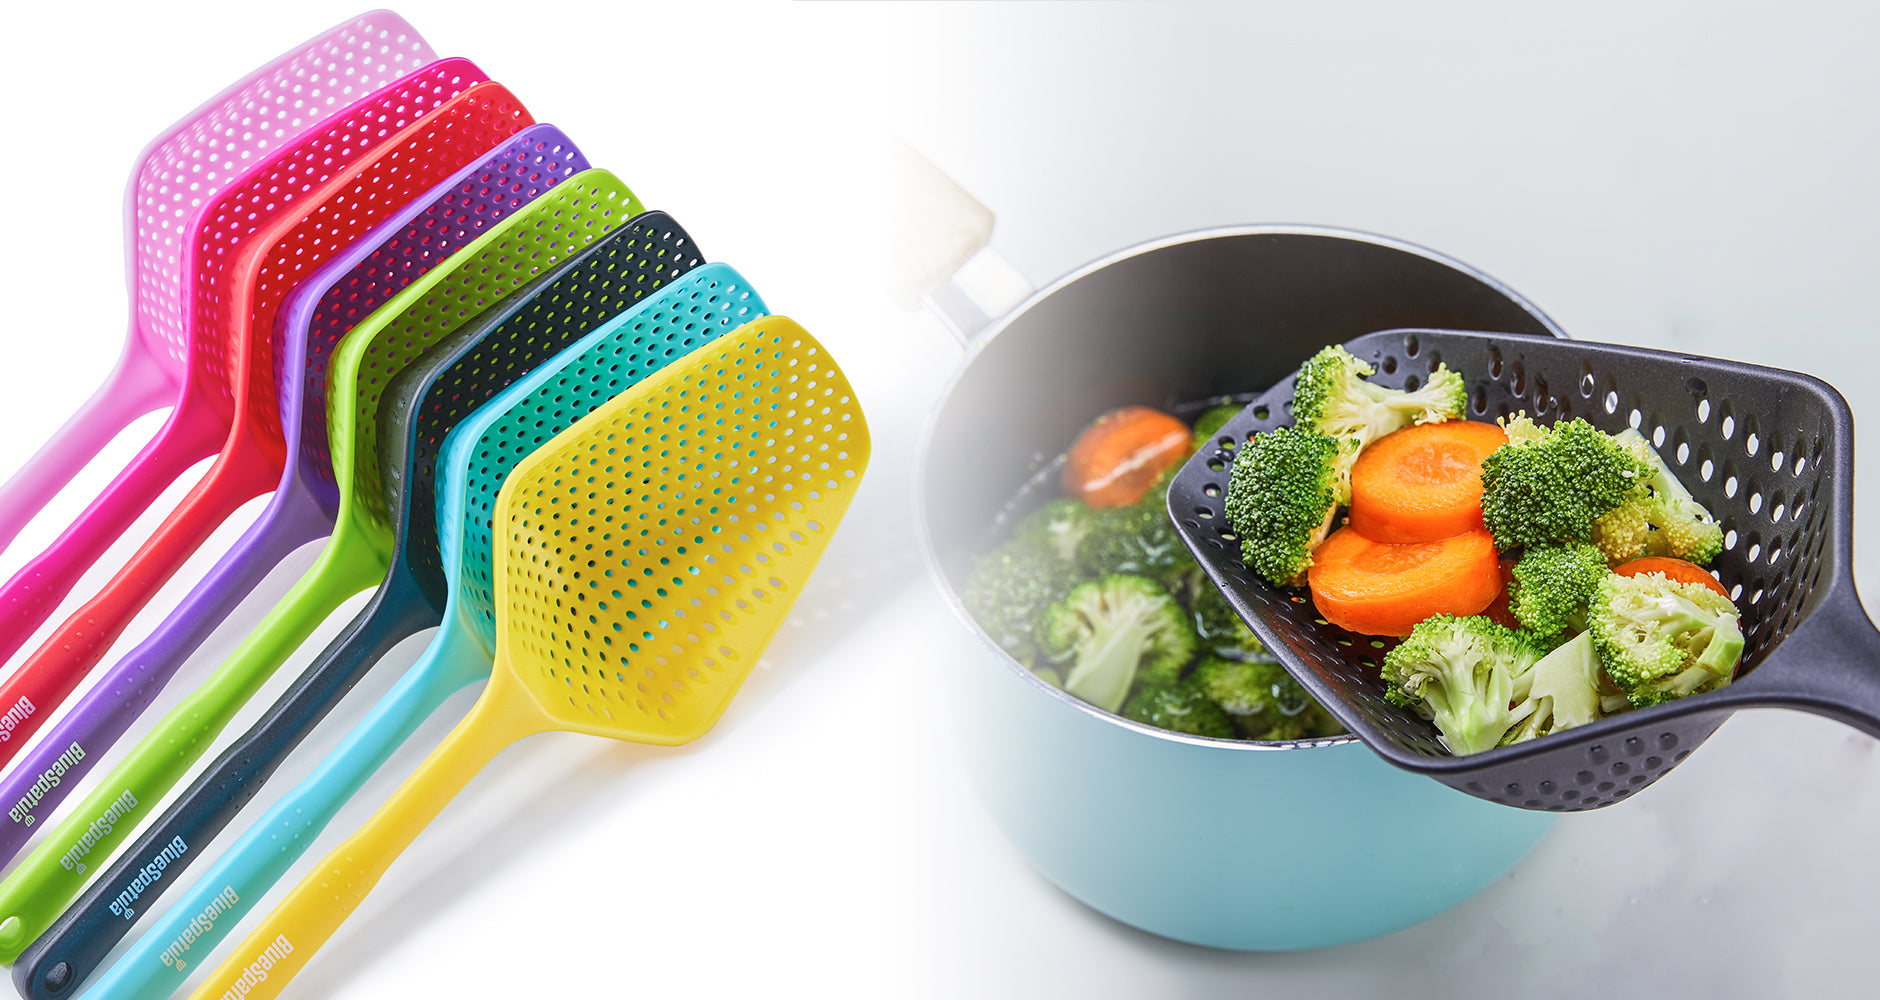 A scooper, strainer, and server all in one!